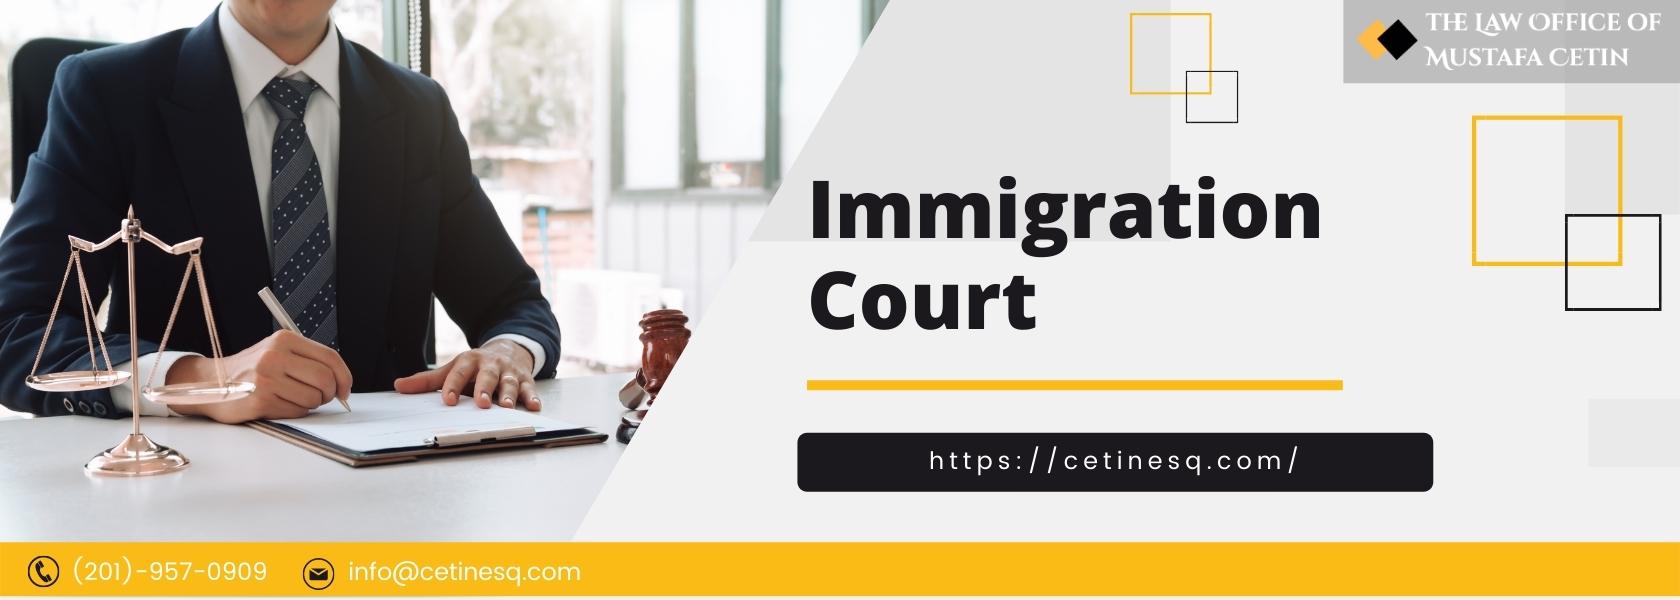 Admission, Status, Removal Proceedings, Detained and Non-detained Docket at Immigration Court